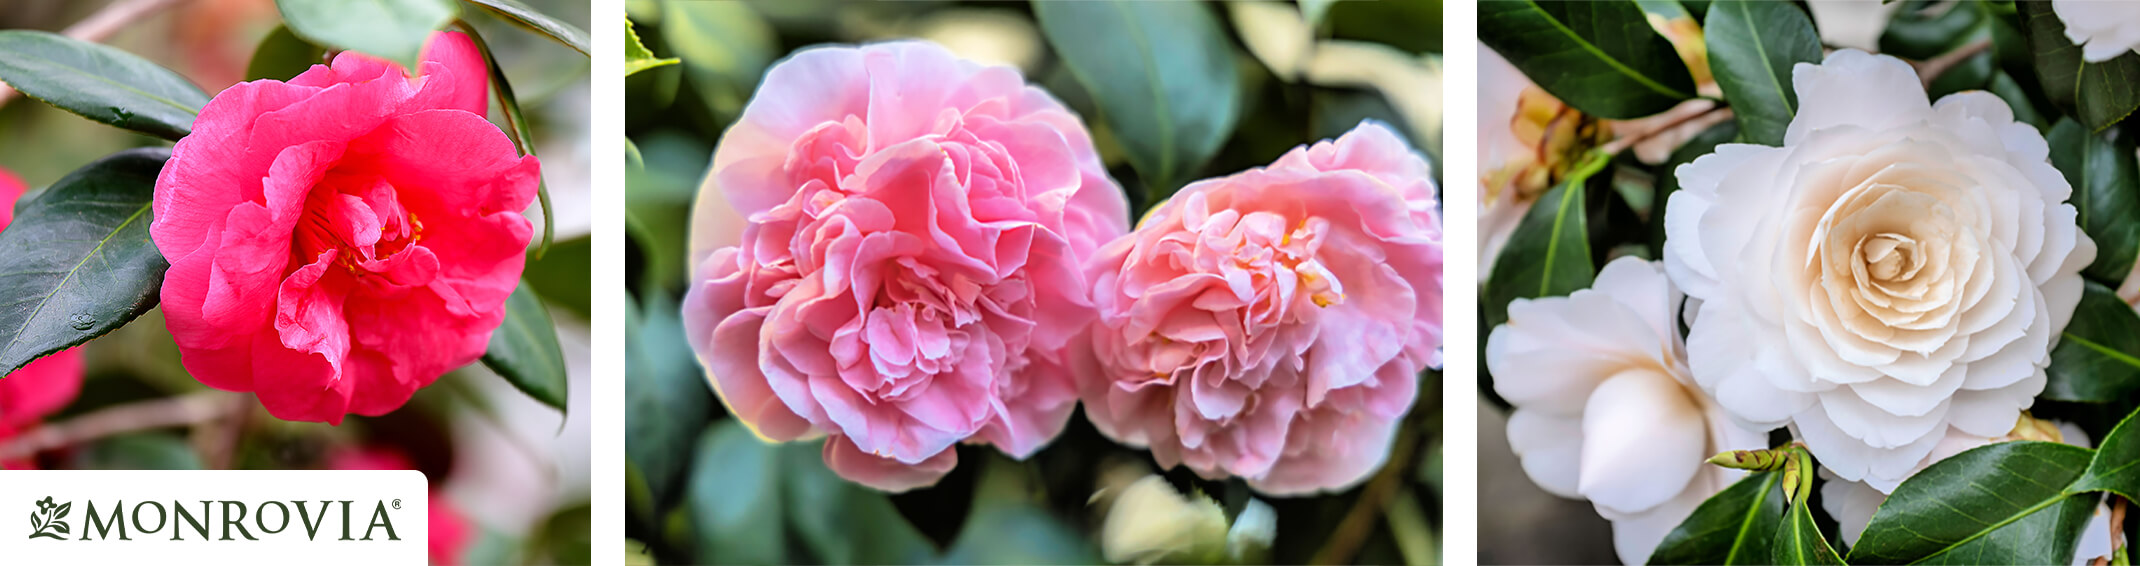 3 images: a bright pink camellia with the Monrovia logo on it, 2 light pink camellias, and 2 white camelias